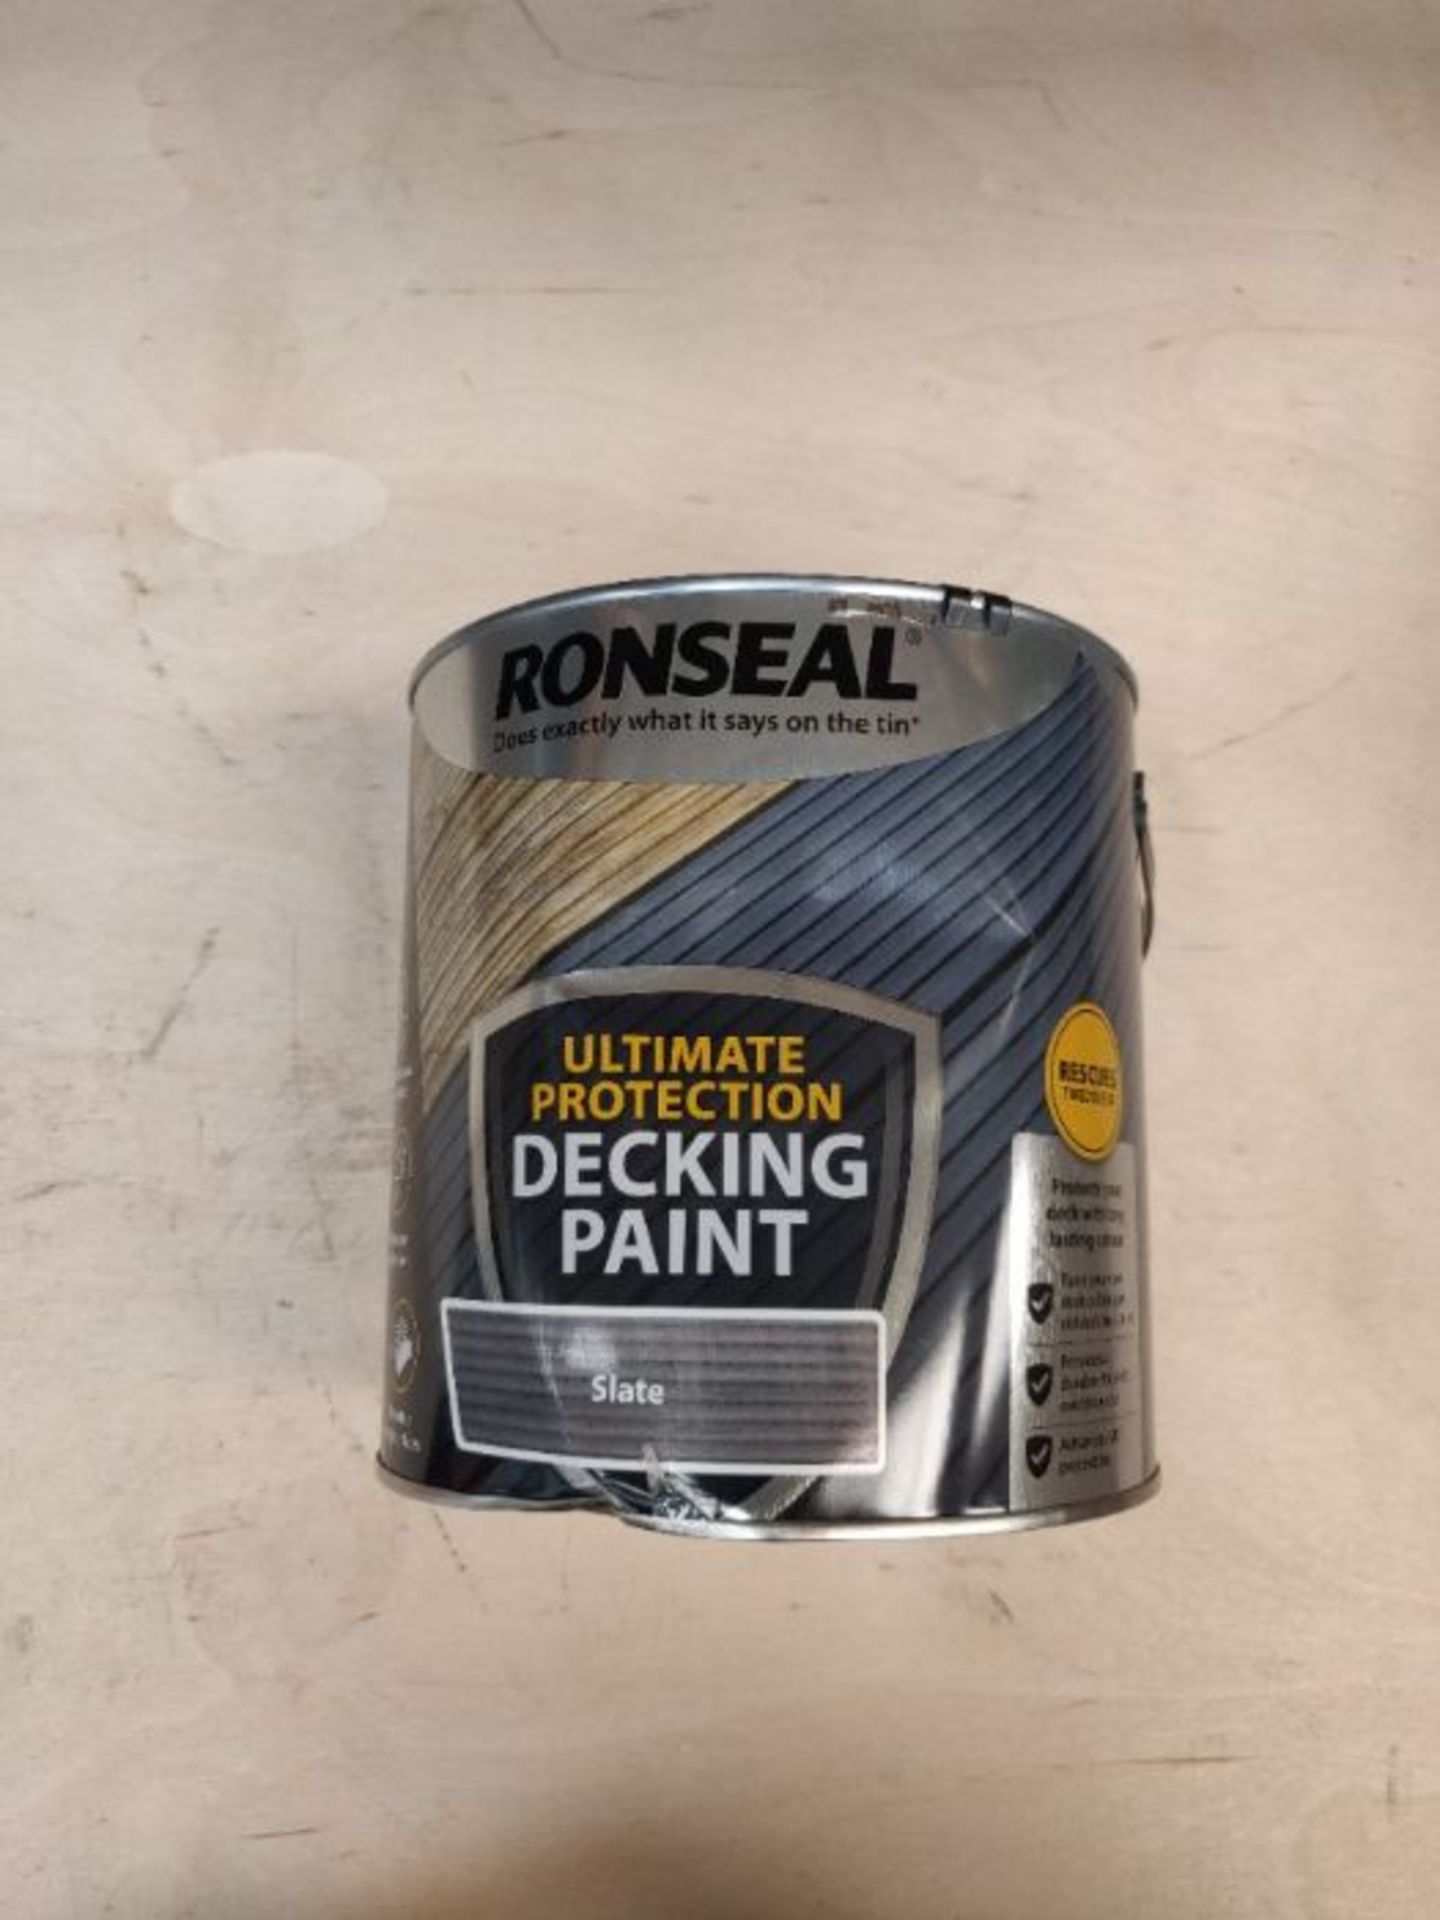 RONSEAL ULTIMATE DECKING PAINT SLATE 2.5L - Image 2 of 2